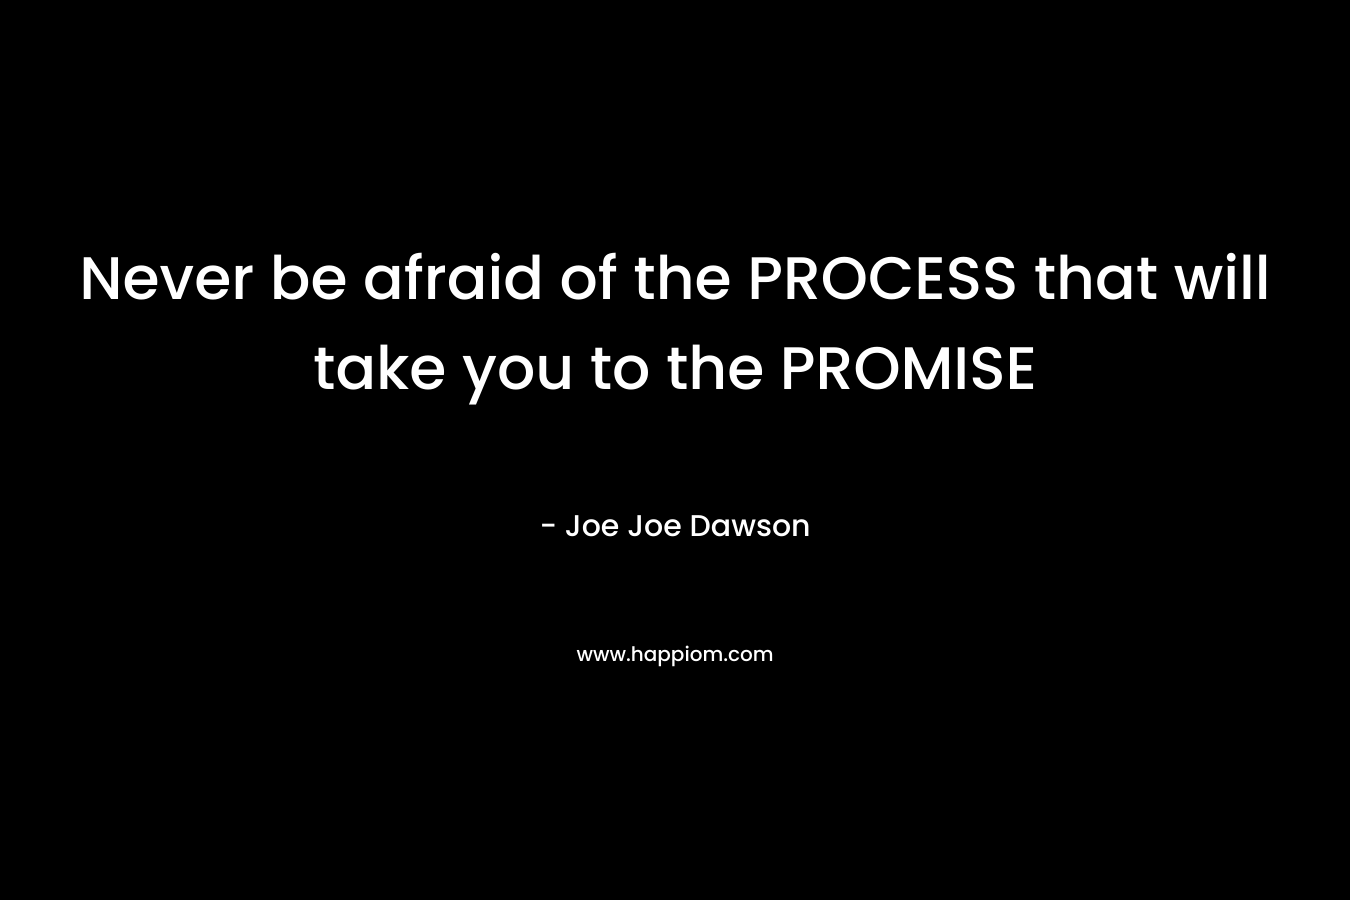 Never be afraid of the PROCESS that will take you to the PROMISE